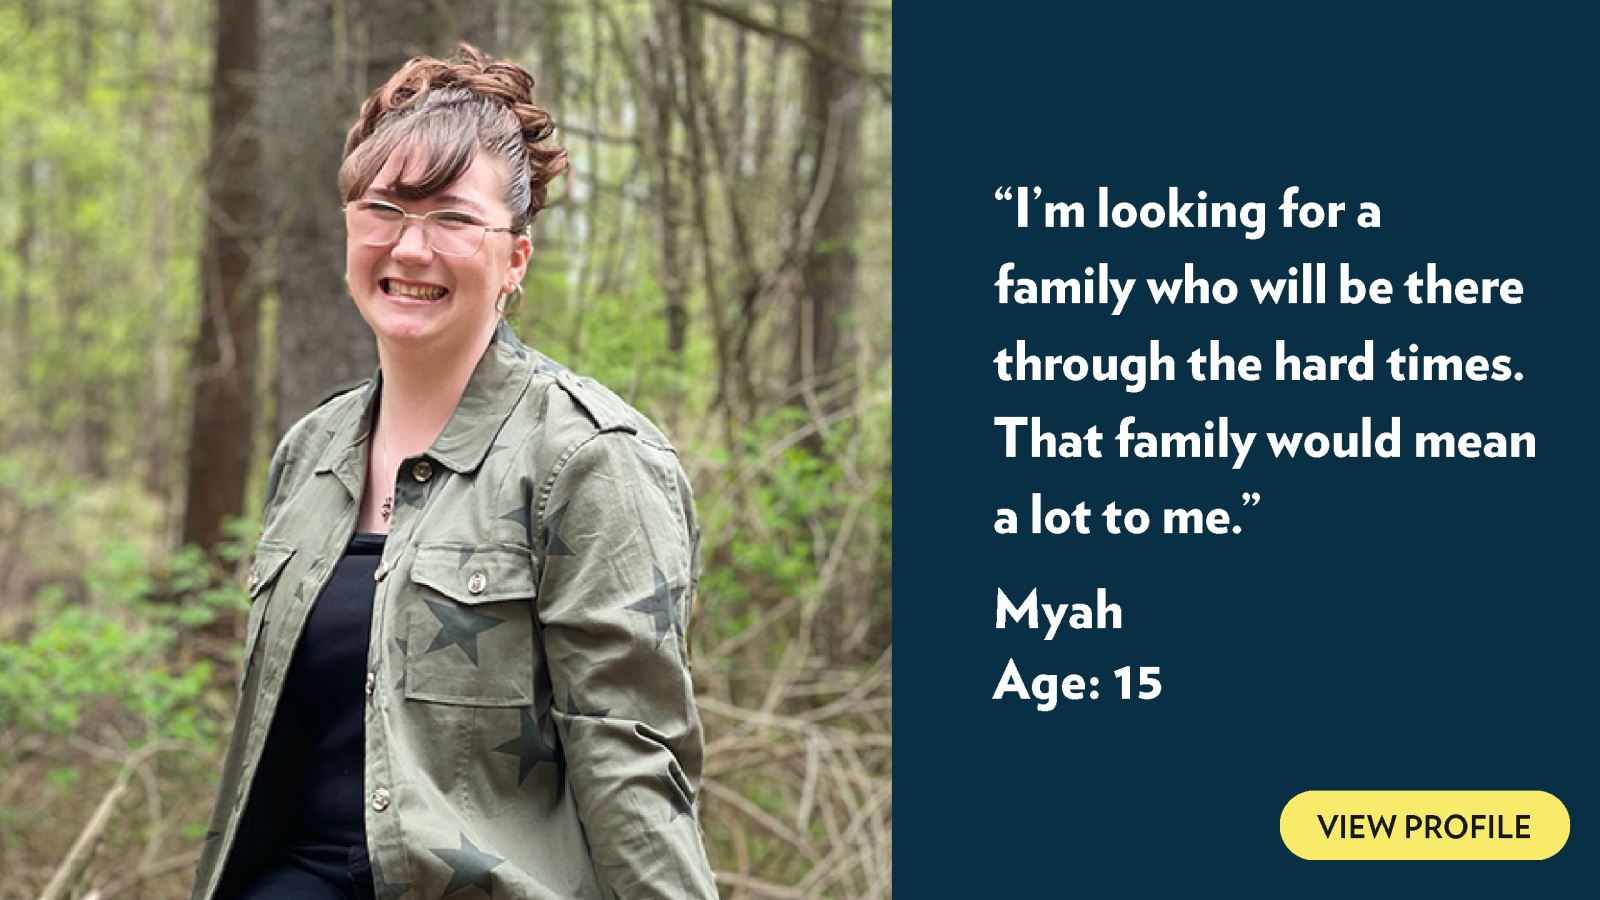 I’m looking for a family who will be there through the hard times. That family would mean a lot to me. Myah, age 15. View profile.